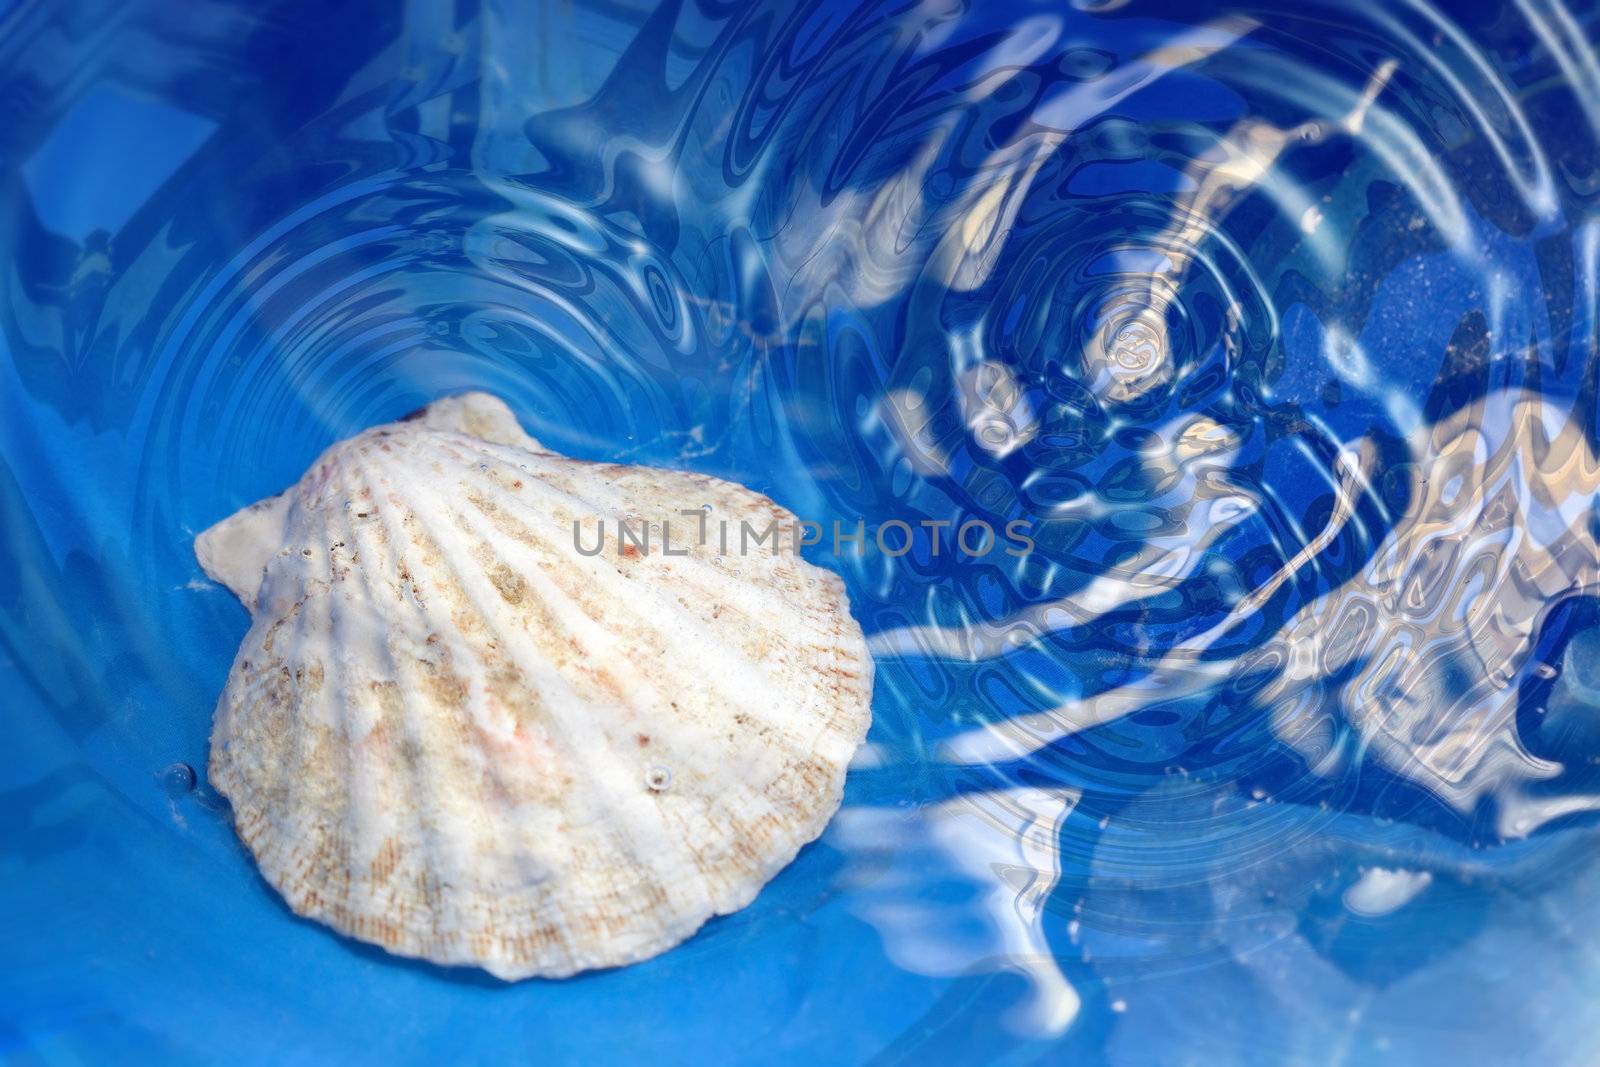 Close-up photo of the seashell under the blue water with ripples